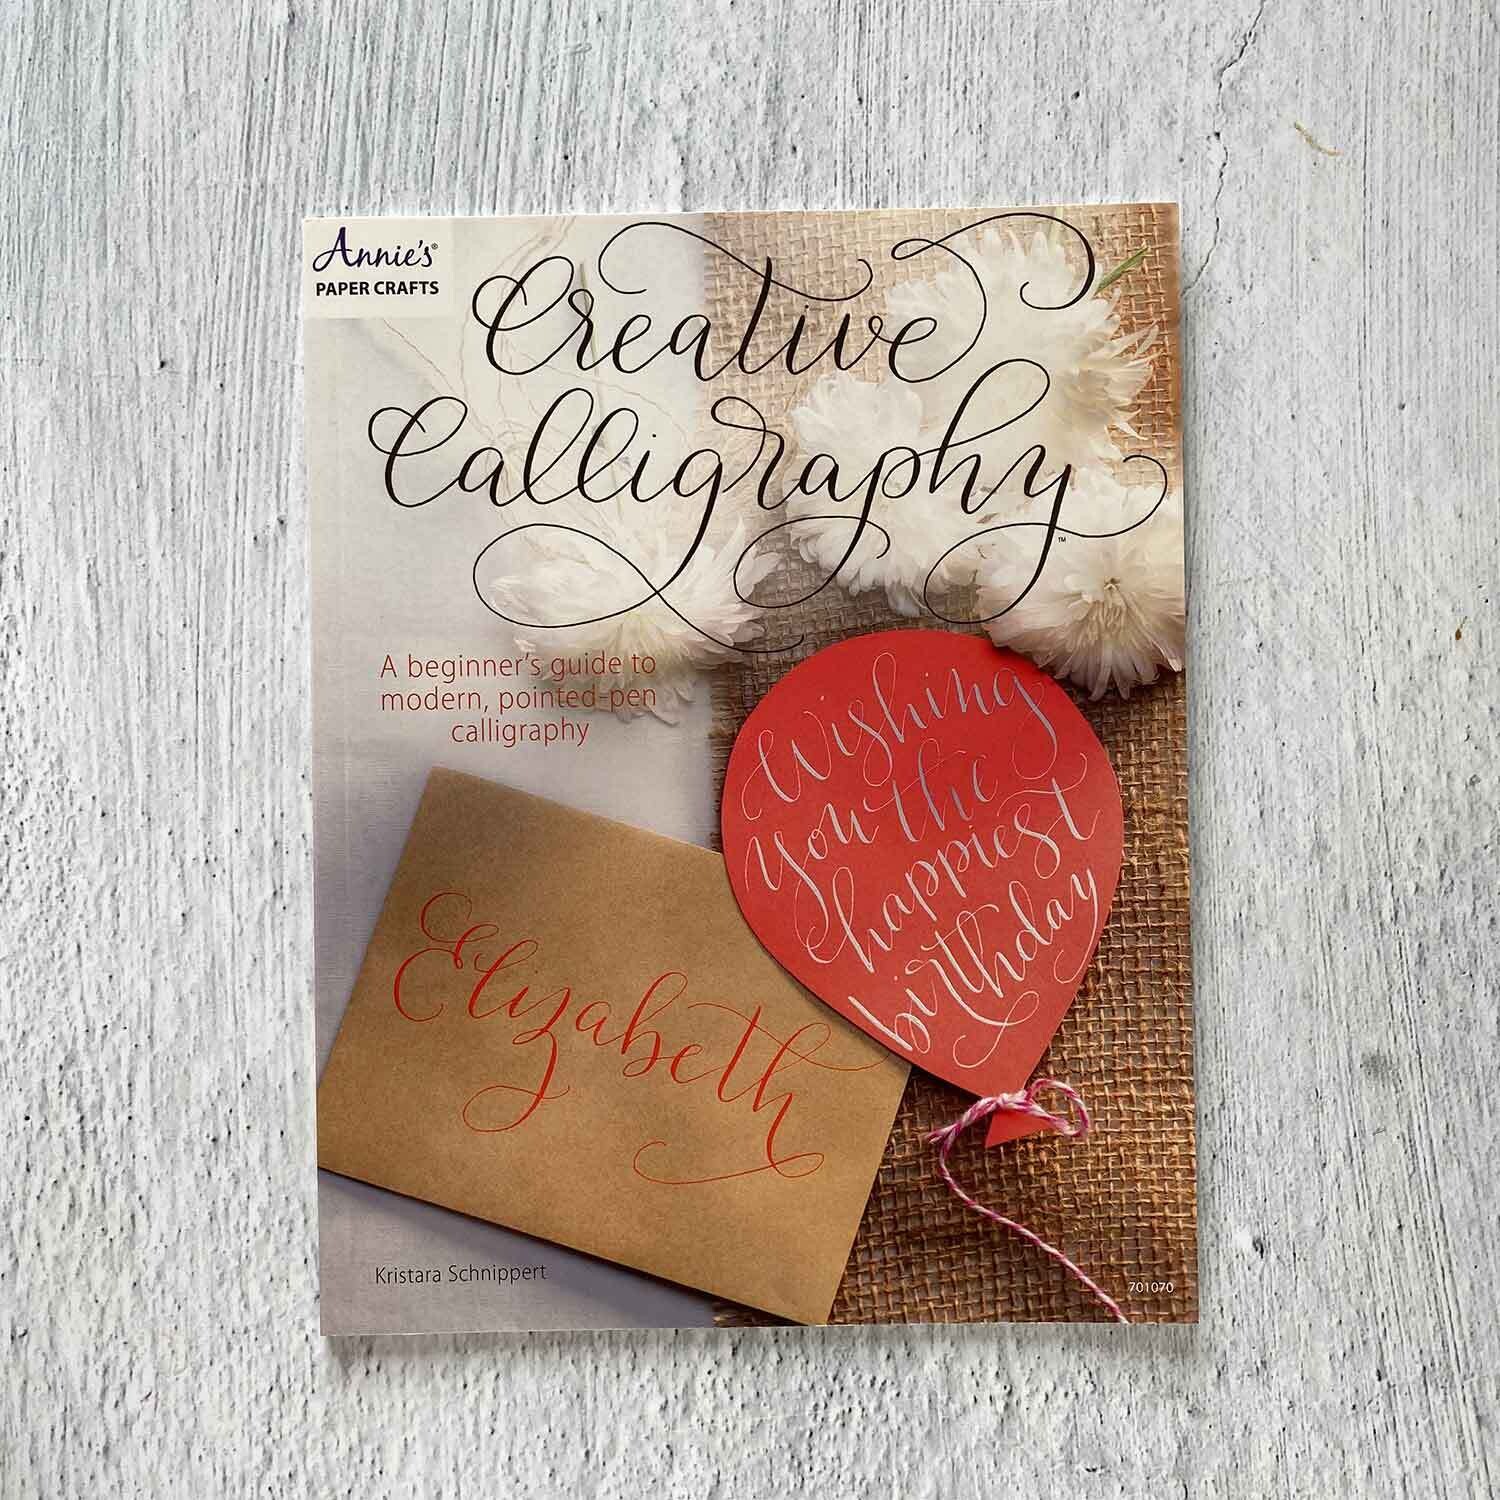 Creative Calligraphy: A Beginner's Guide to Modern, Pointed-pen Calligraphy